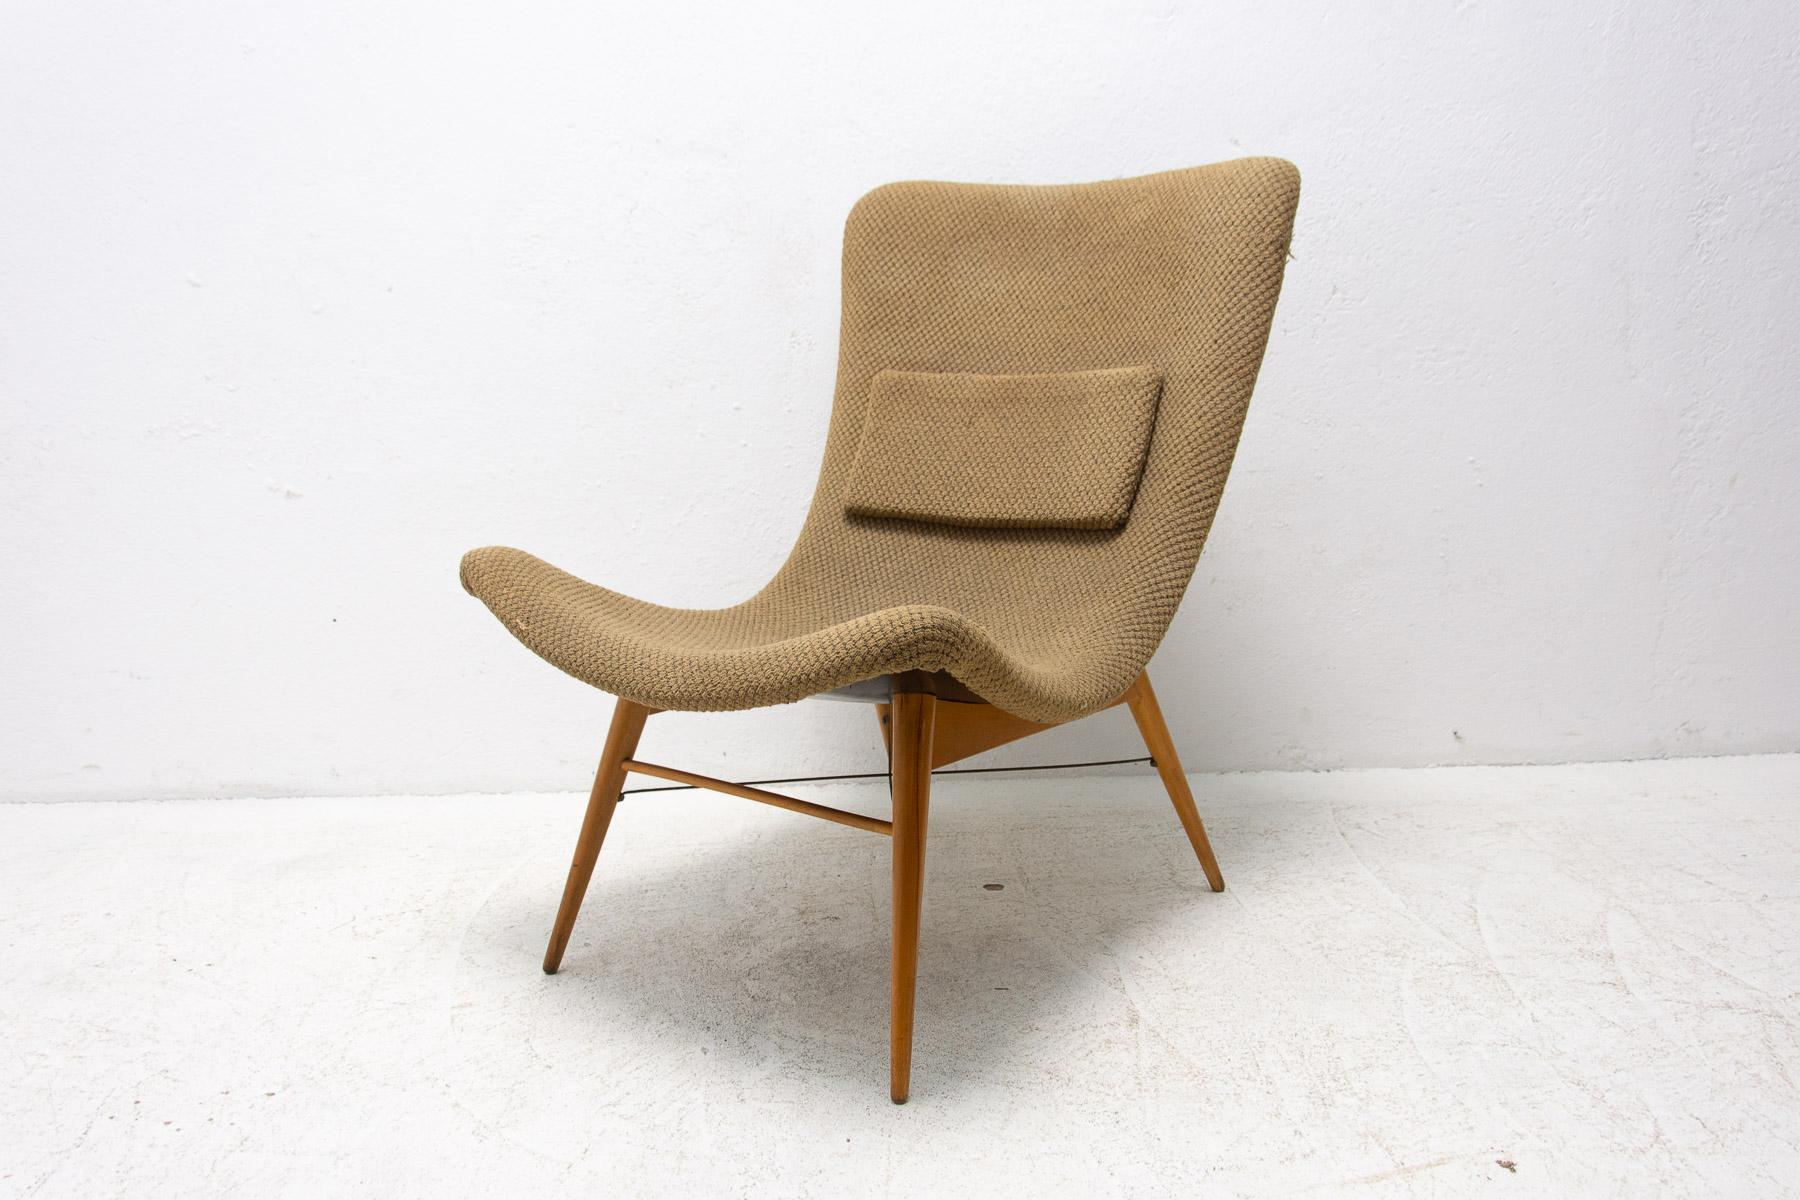 This popular and well-known wingback chair attributed to the Czech designer Miroslav Navrátil. This chair was designed in the context of the world-renowned exhibition EXPO in Brussels in 1958, where the Czechoslovak pavillon was a phenomenal